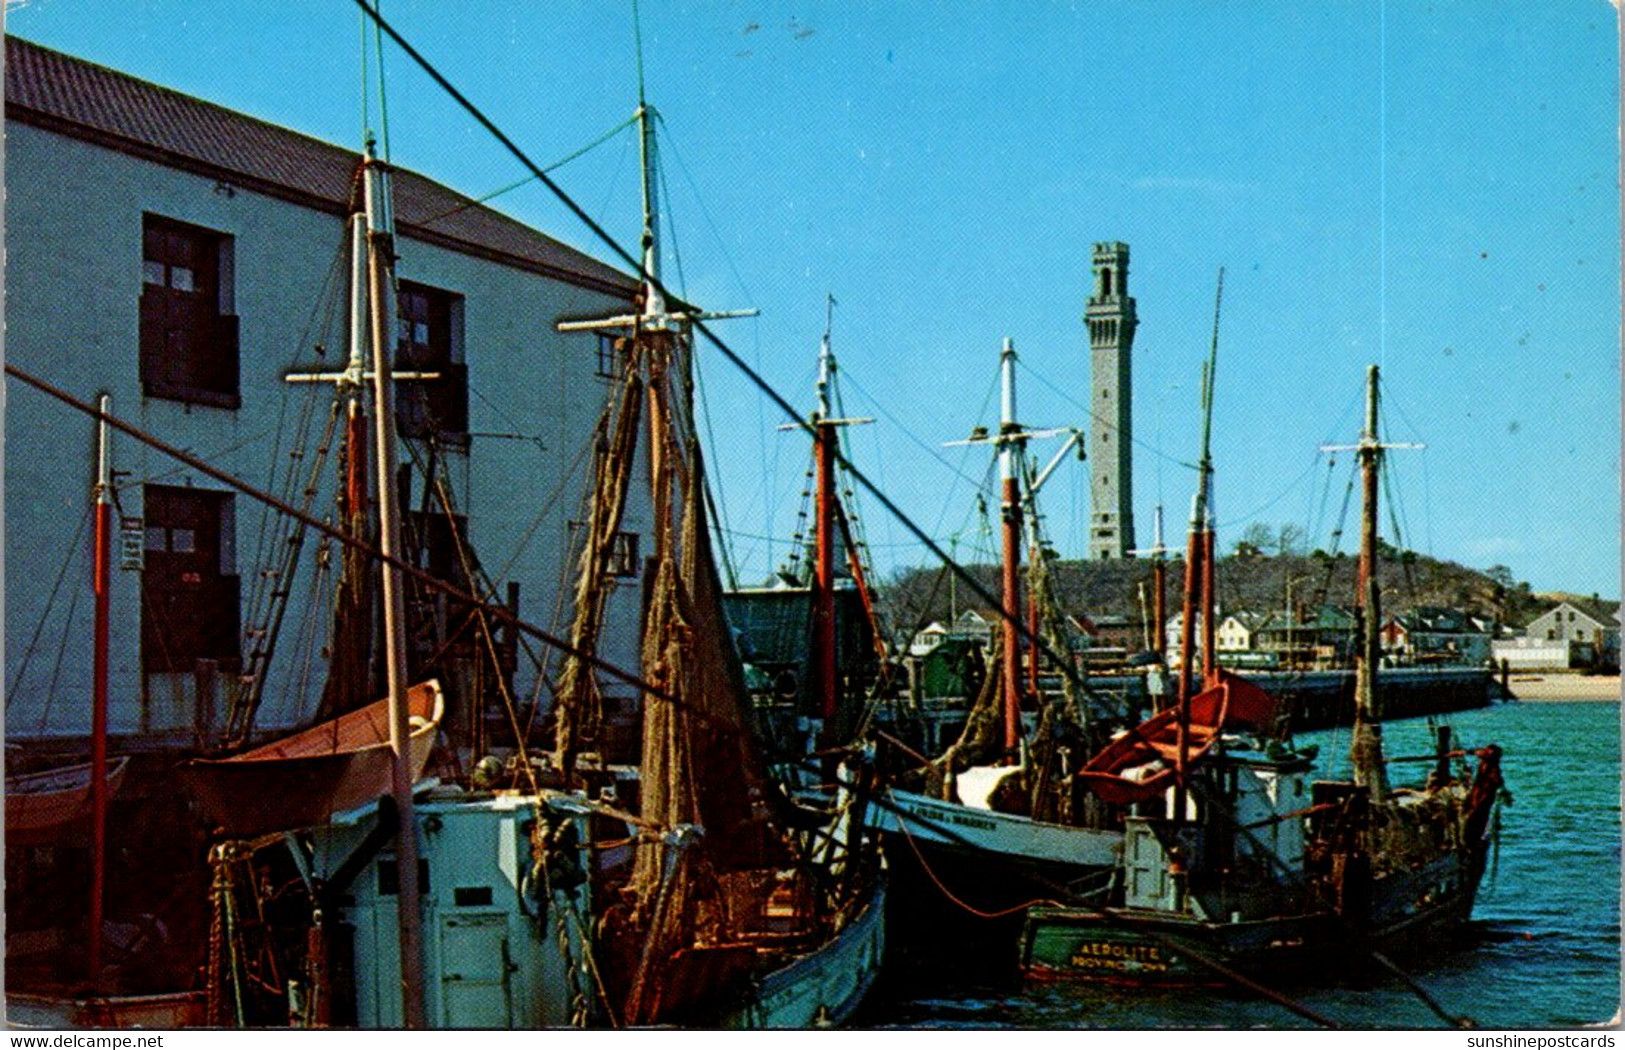 Massachusetts Cape Cod Provincetown Fishing Boats At Town Pier - Cape Cod